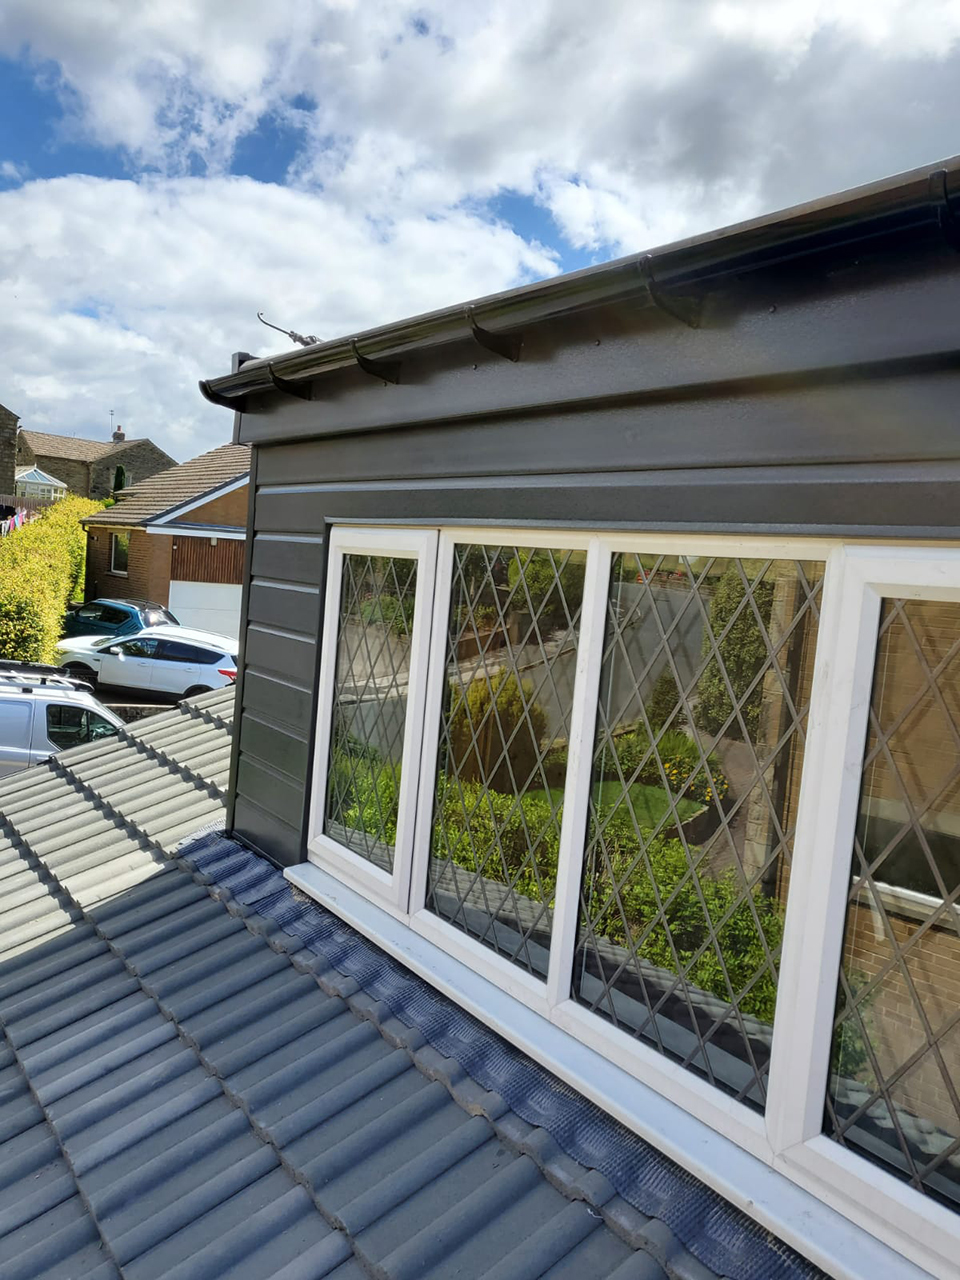 Dormer Construction and Design: Transforming Huddersfield, West Yorkshire Roofs